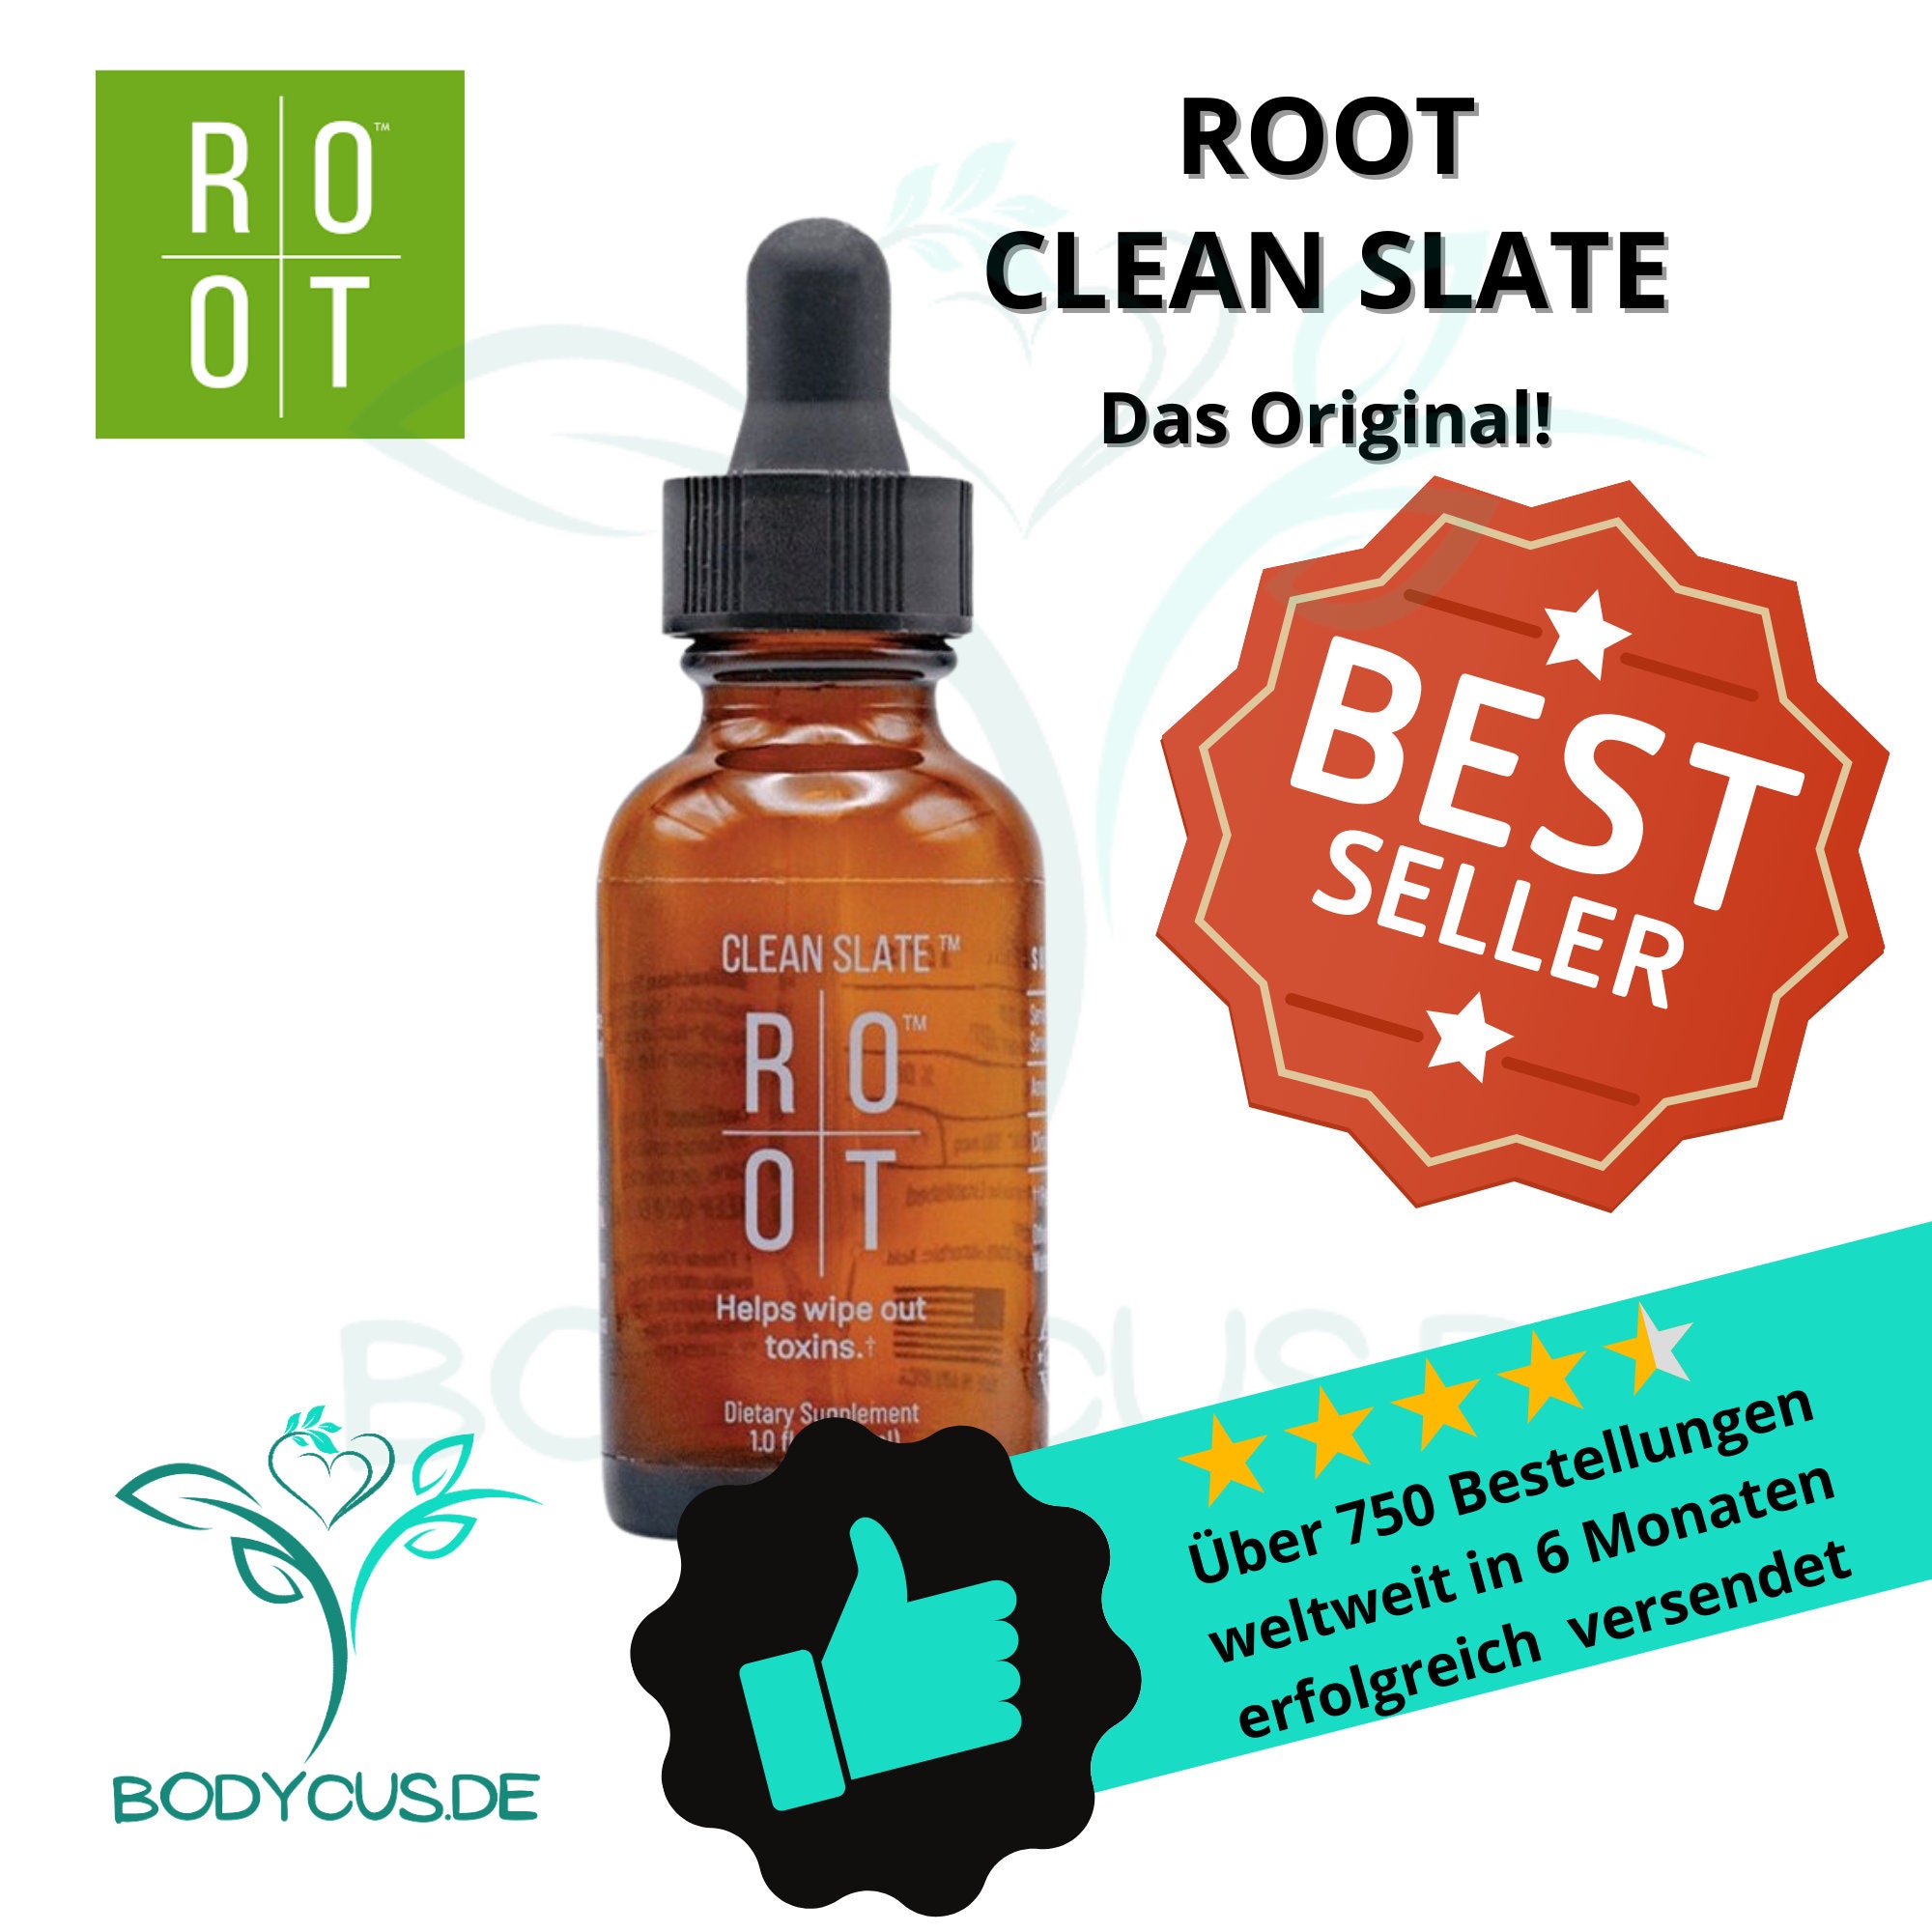 ROOT Clean Slate - from 87.97 euros plus premium free gift